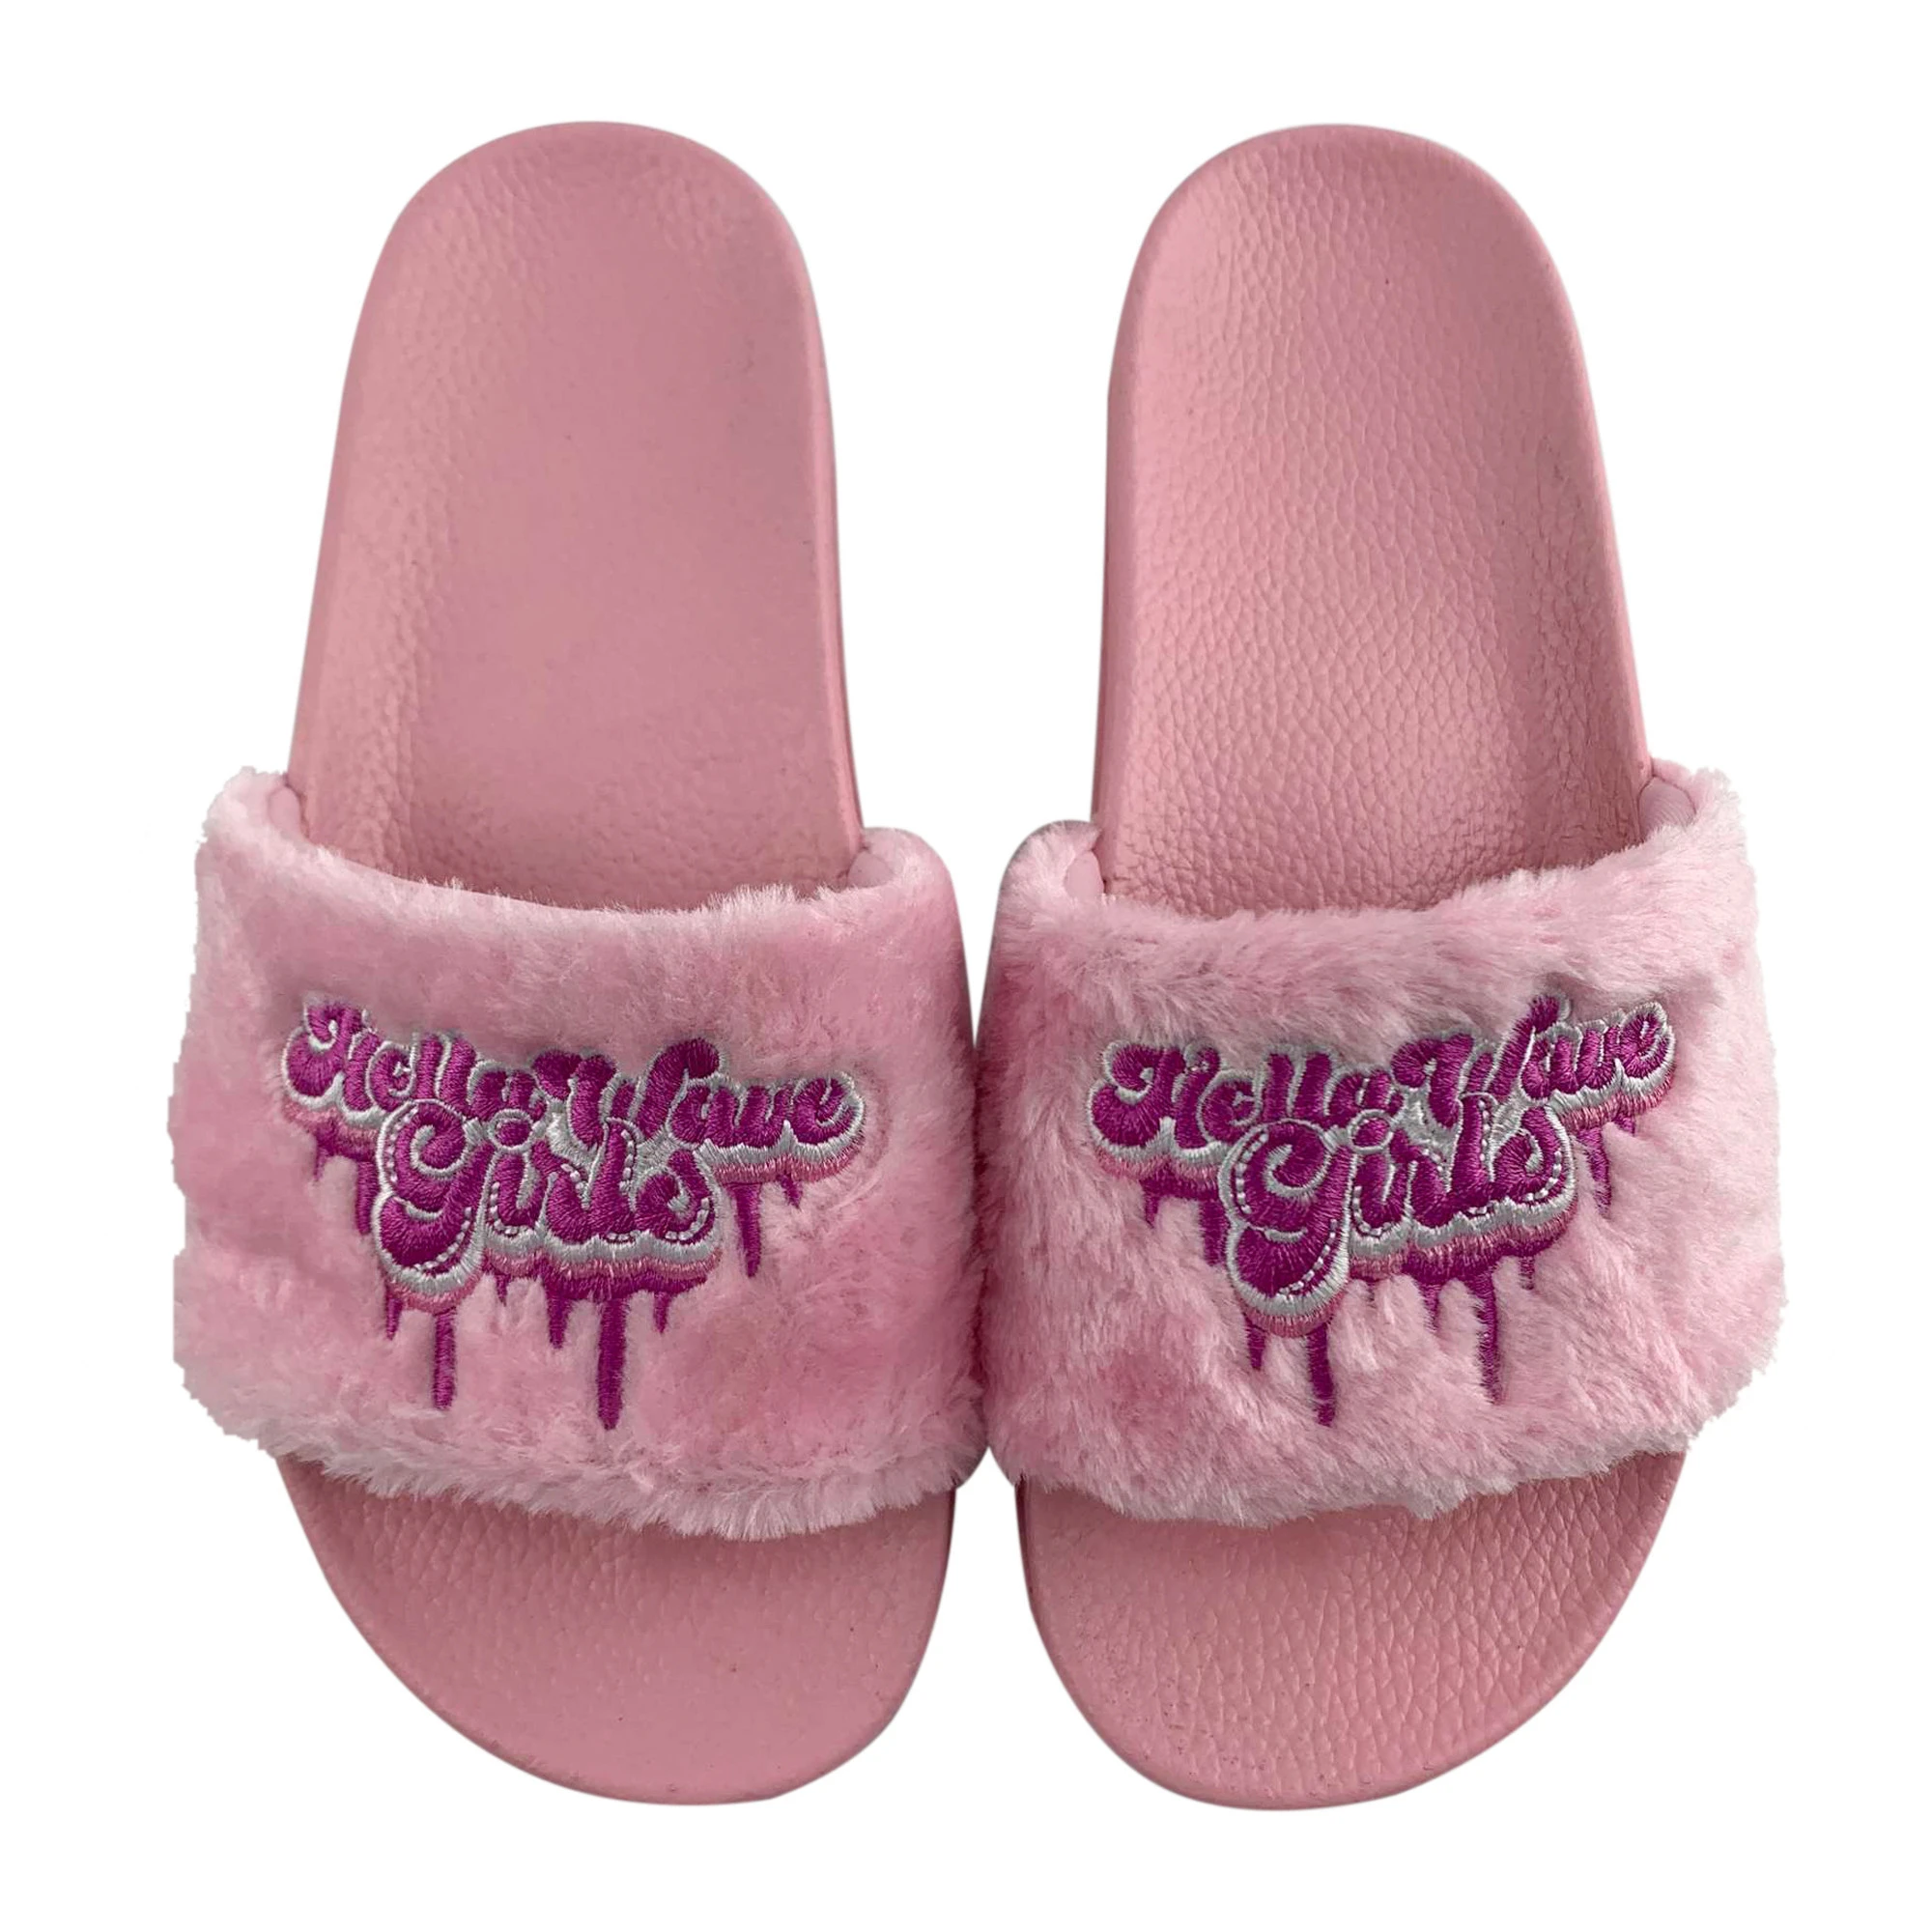 Great shoes 2021 designer Home slippers famous brands Flip Flops Fluffy Slippers Fur sandals for women and shoes